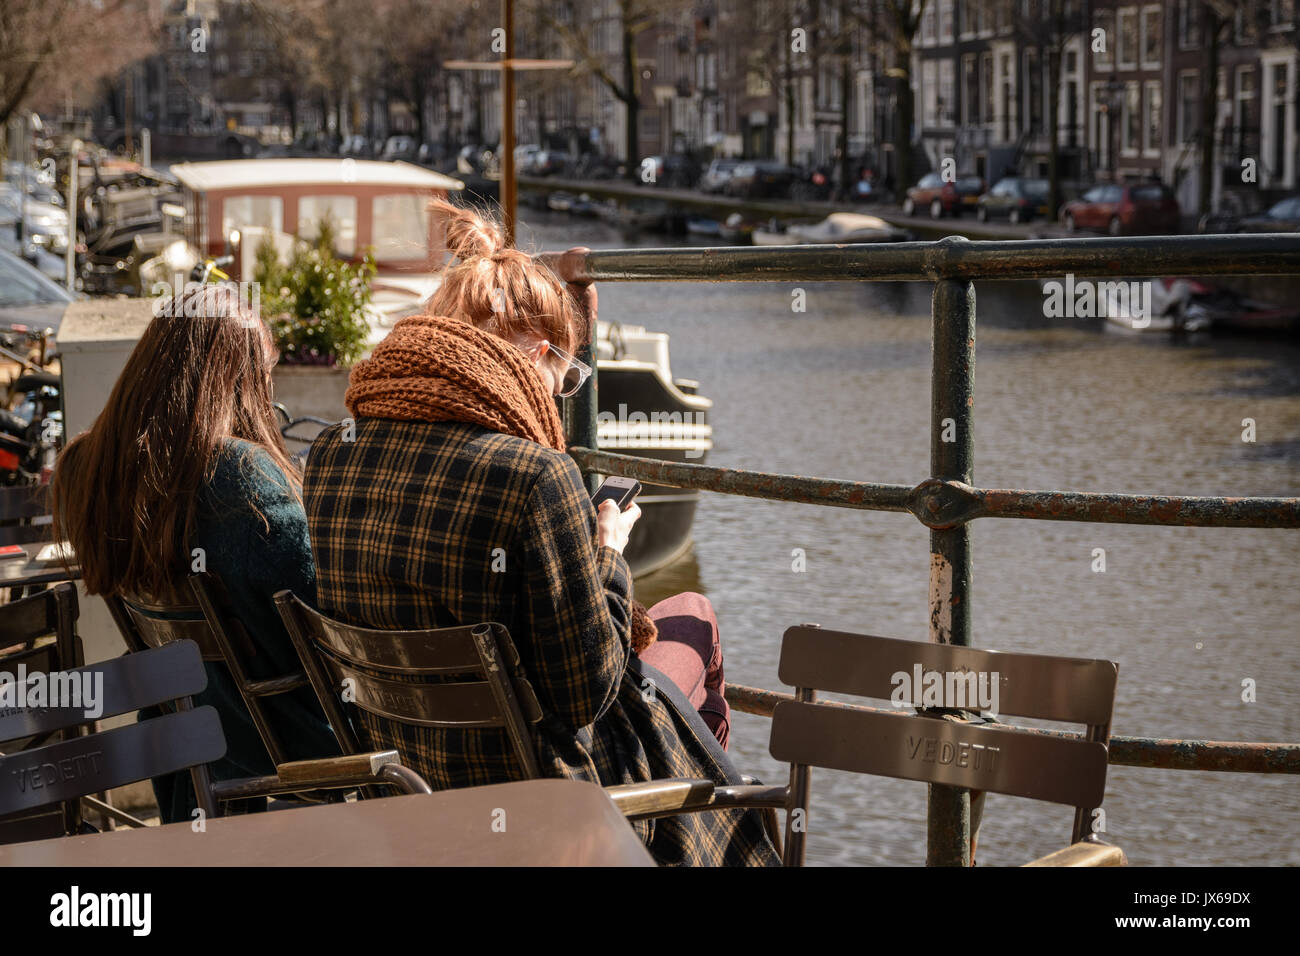 Young people reading books in an outdoor café along a canal in Amsterdam (Netherlands). March 2015. Portrait format. Stock Photo